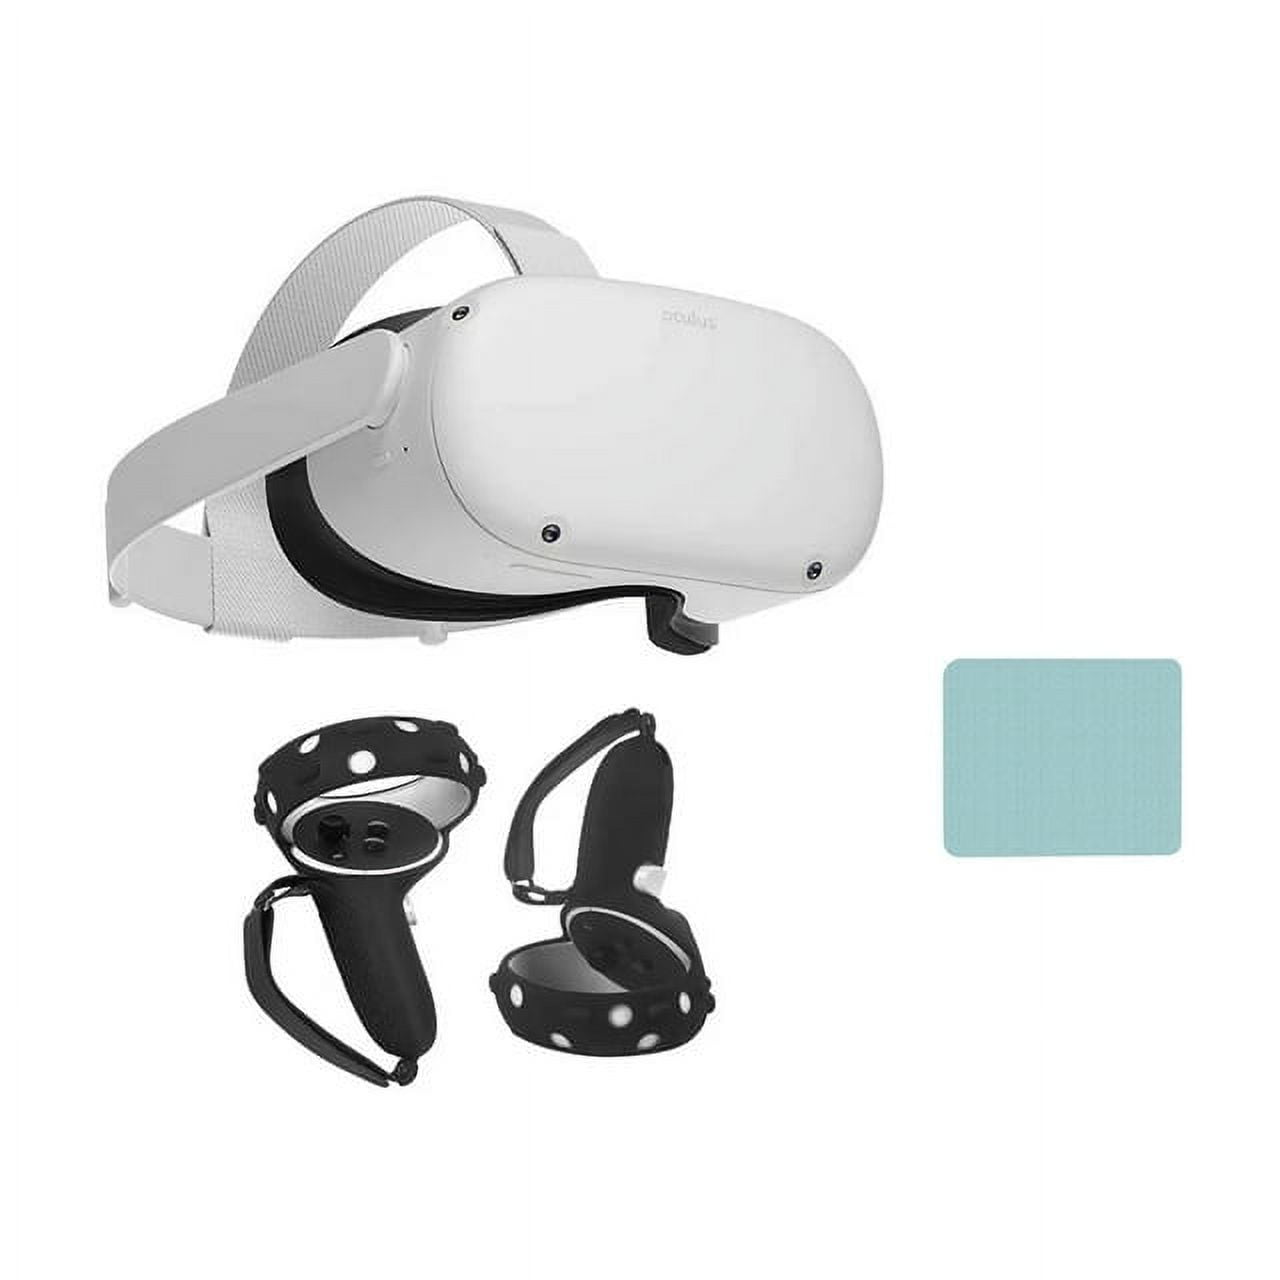 Meta Quest 2 - Advanced All-In-One Virtual Reality Headset - 128GB